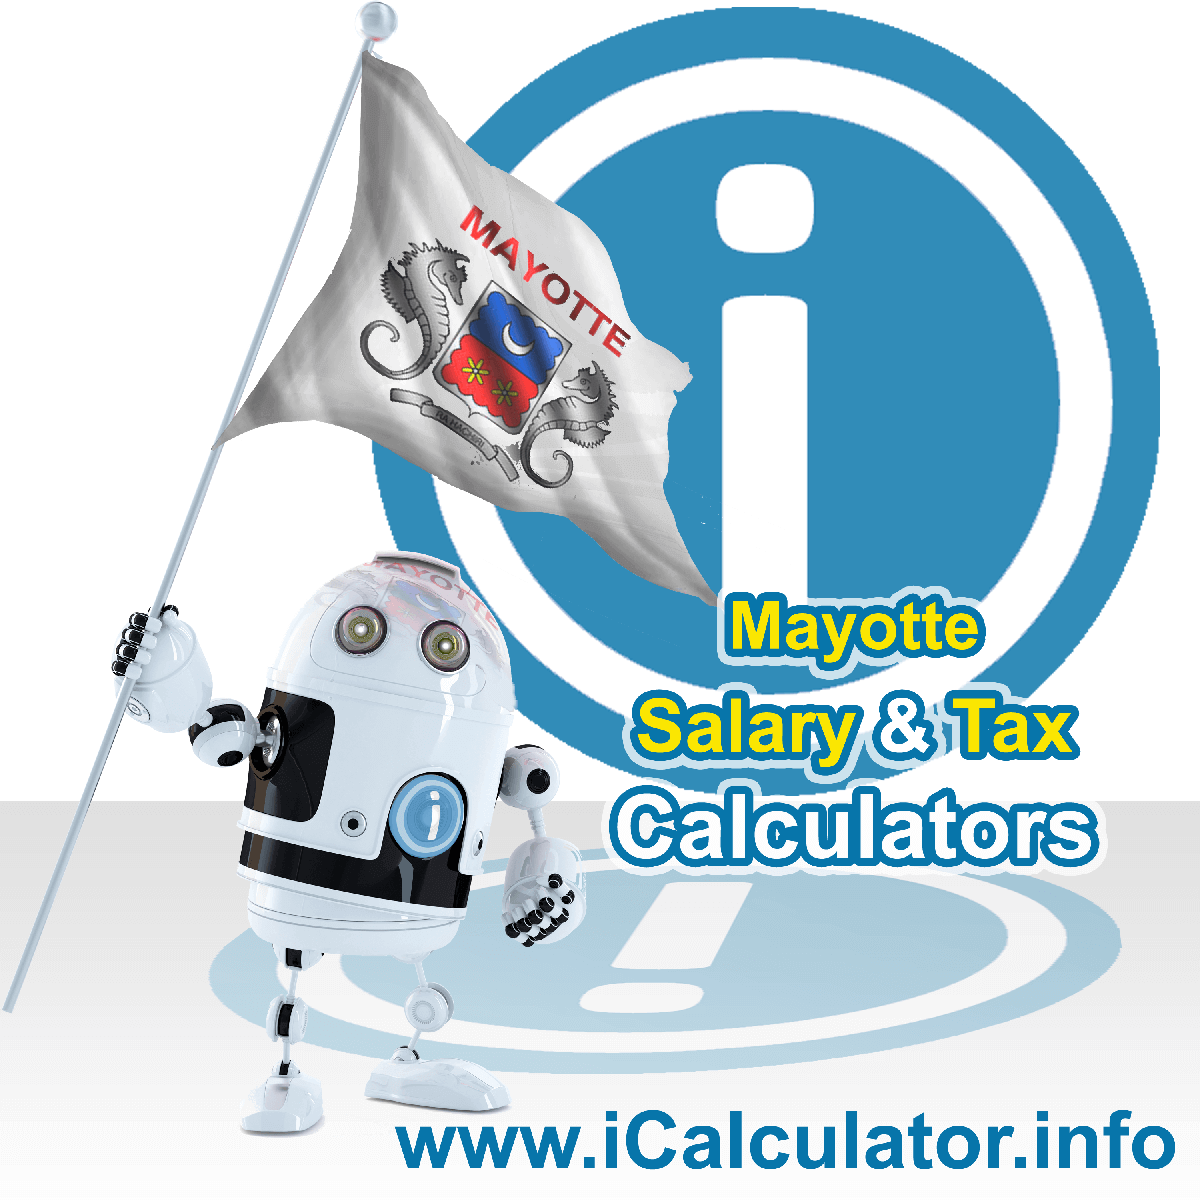 Mayotte Wage Calculator. This image shows the Mayotte flag and information relating to the tax formula for the Mayotte Tax Calculator